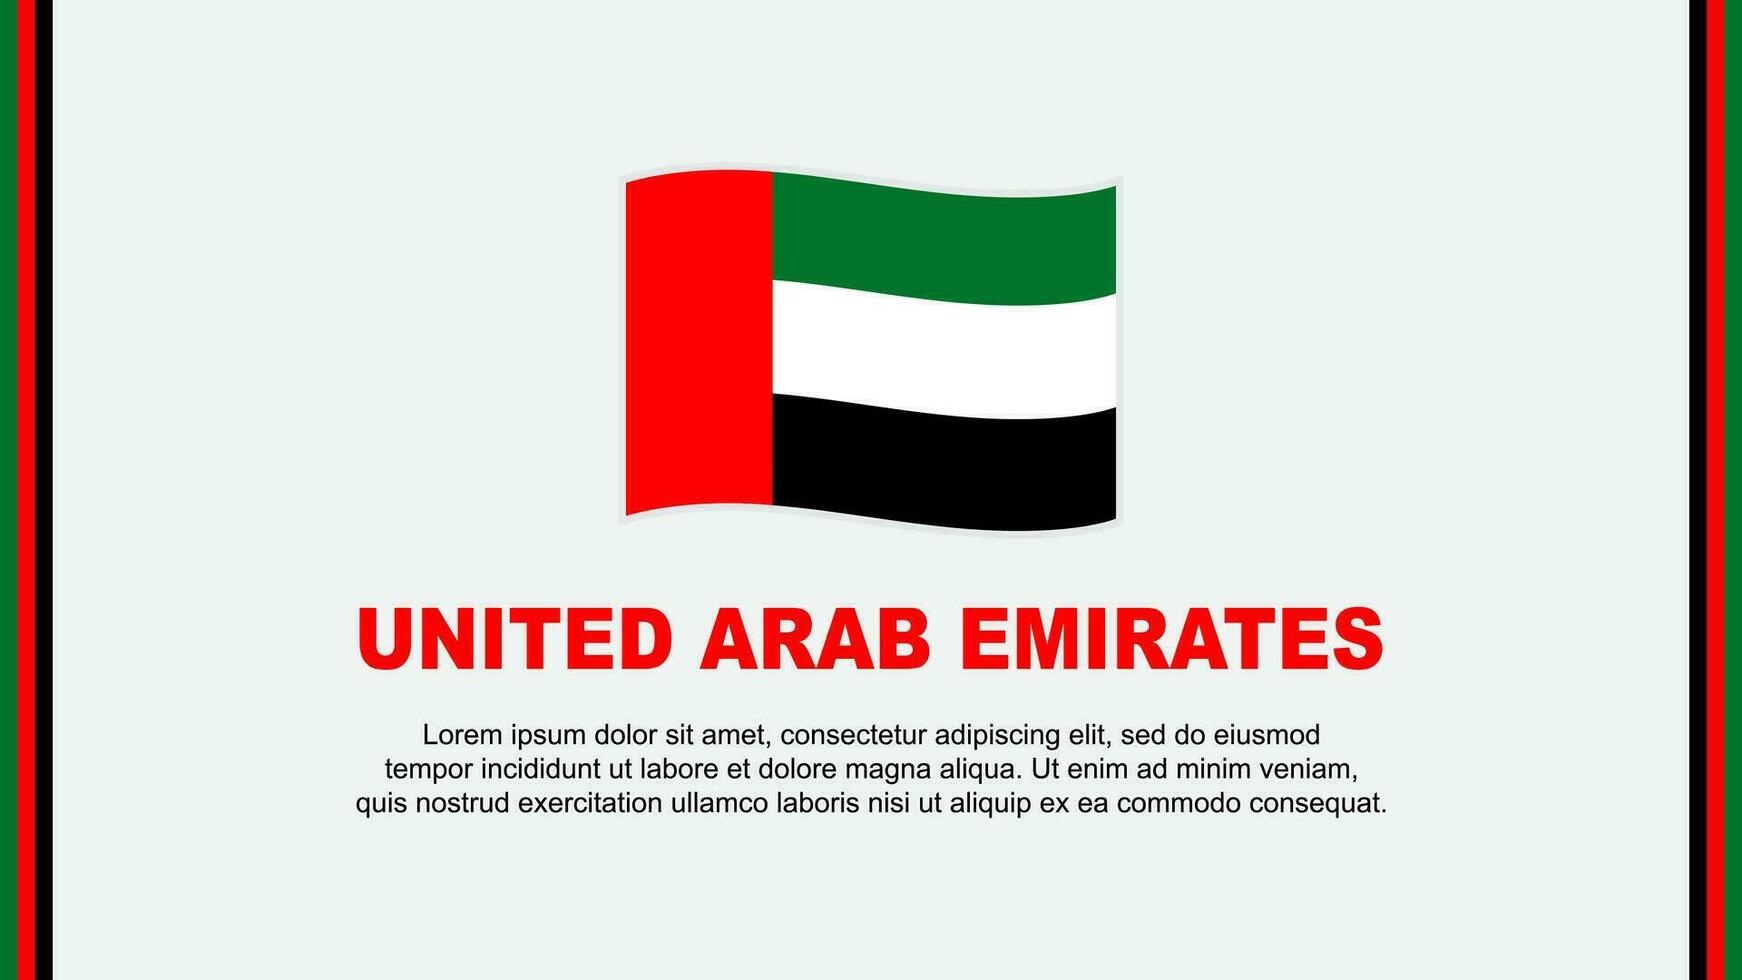 United Arab Emirates Flag Abstract Background Design Template. United Arab Emirates Independence Day Banner Social Media Vector Illustration. Cartoon